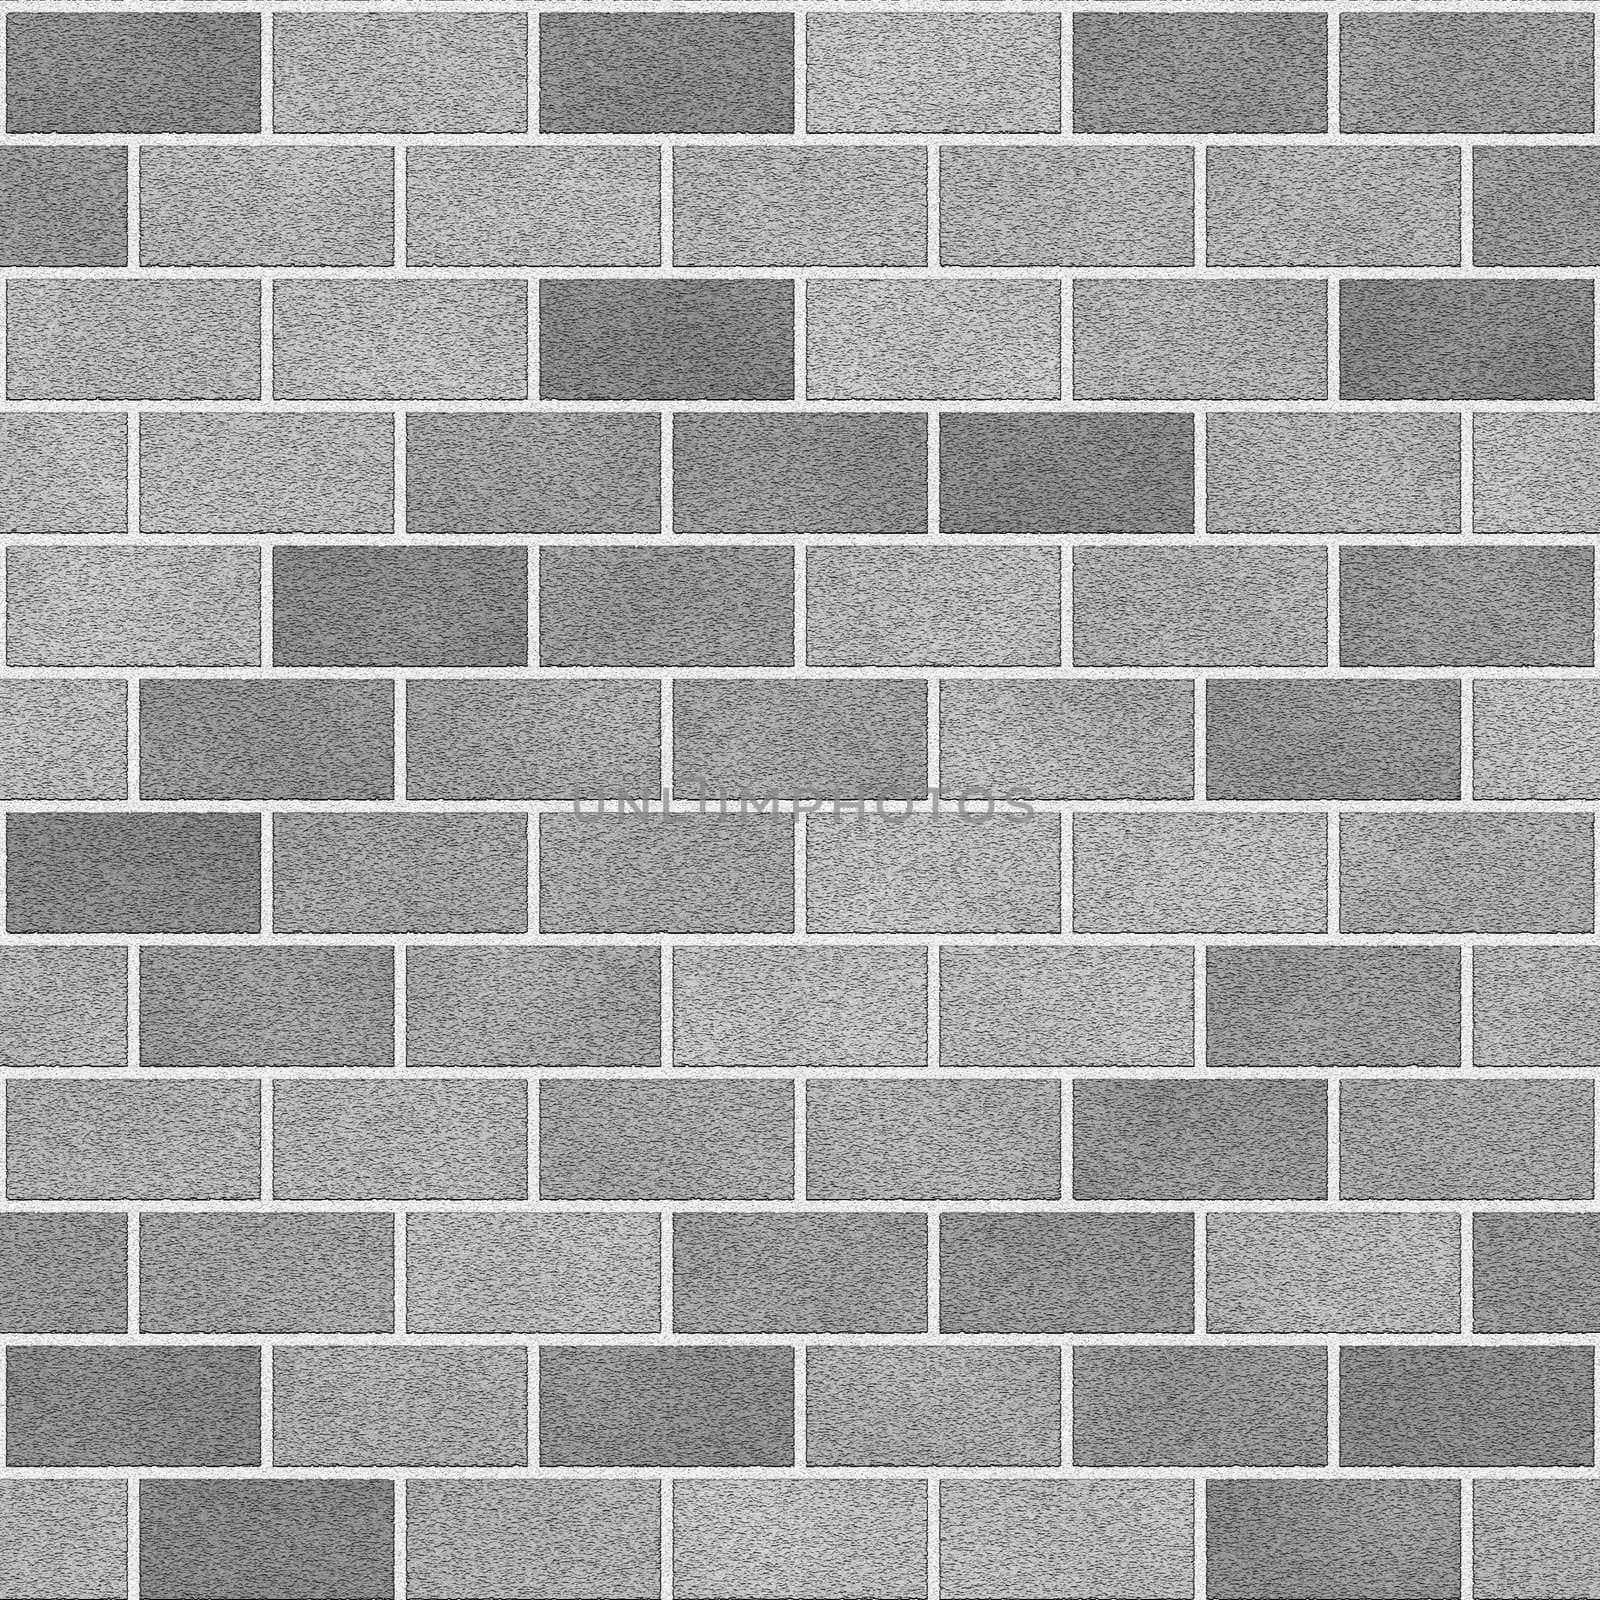 Construction blocks texture in shades of grey